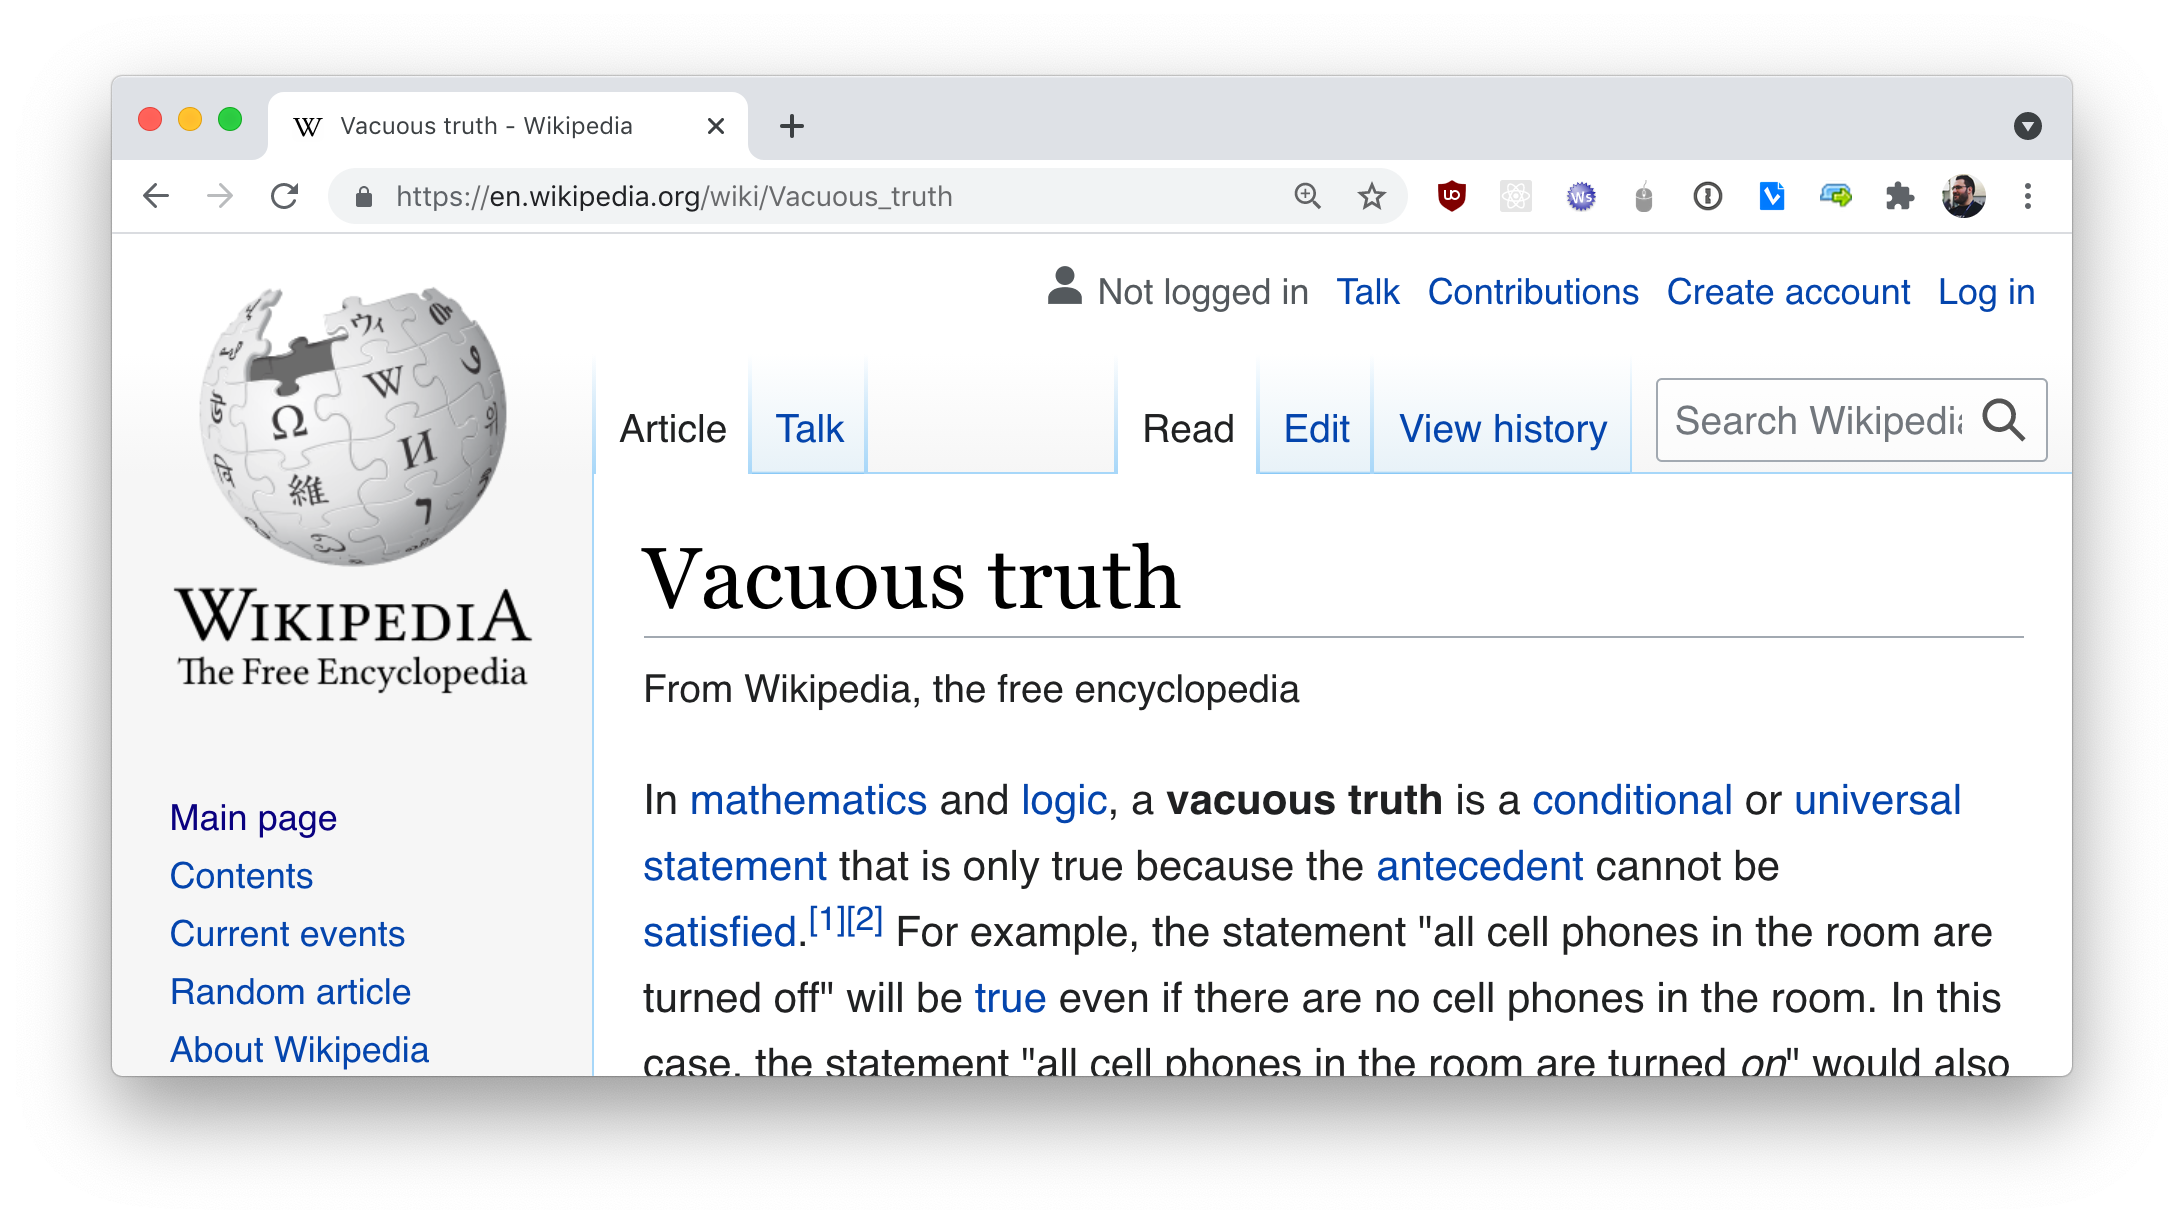 “Vacuous truth” on Wikipedia